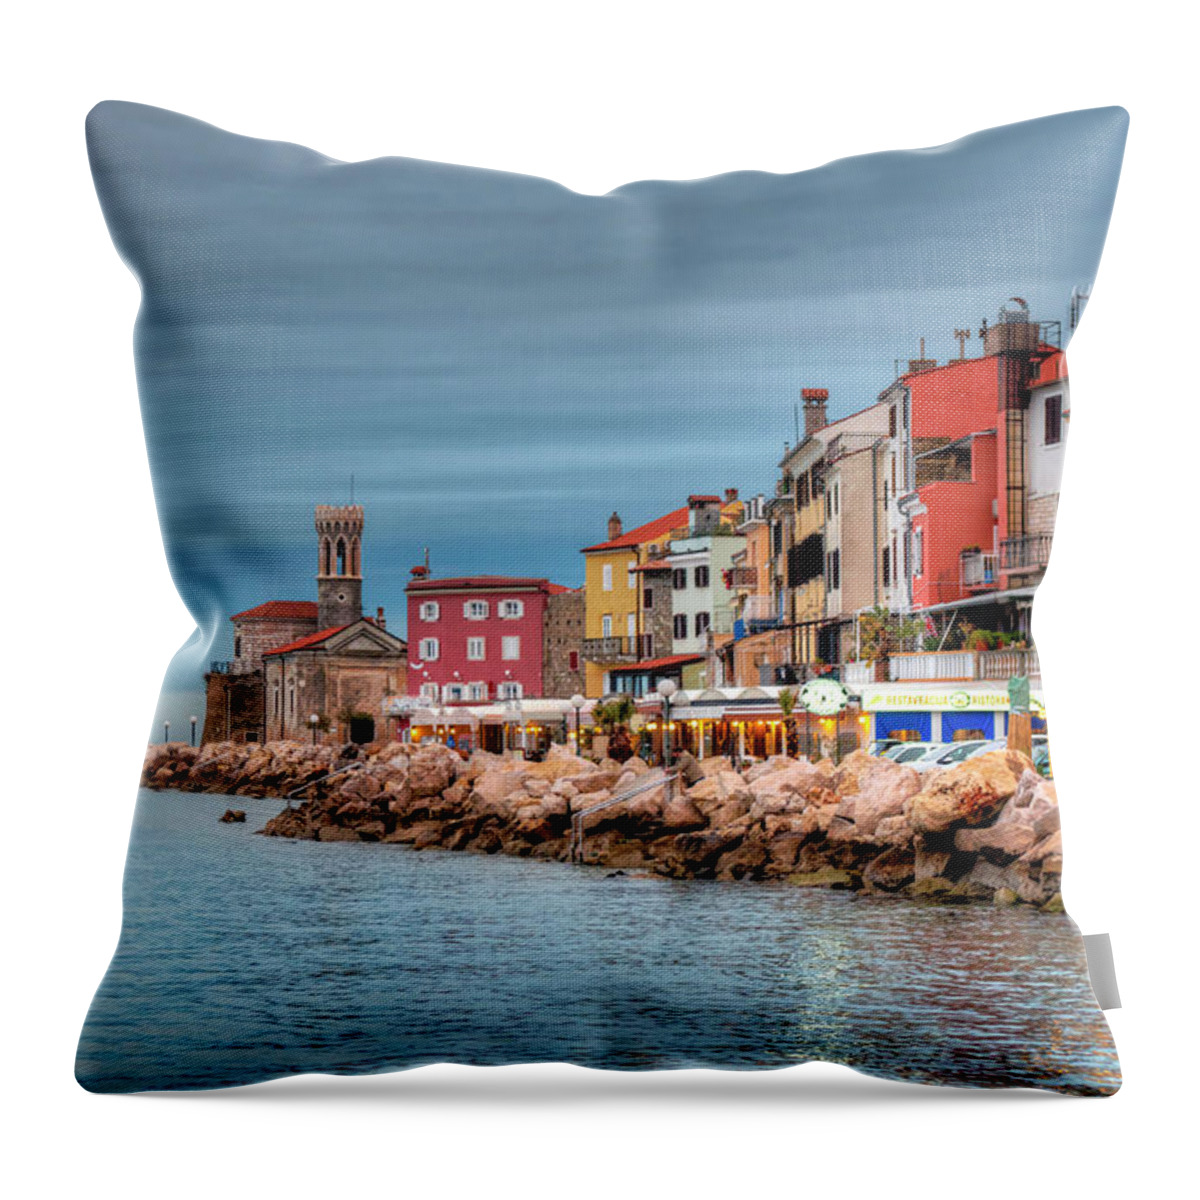 Tranquility Throw Pillow featuring the photograph Piran by Filippo Maria Bianchi